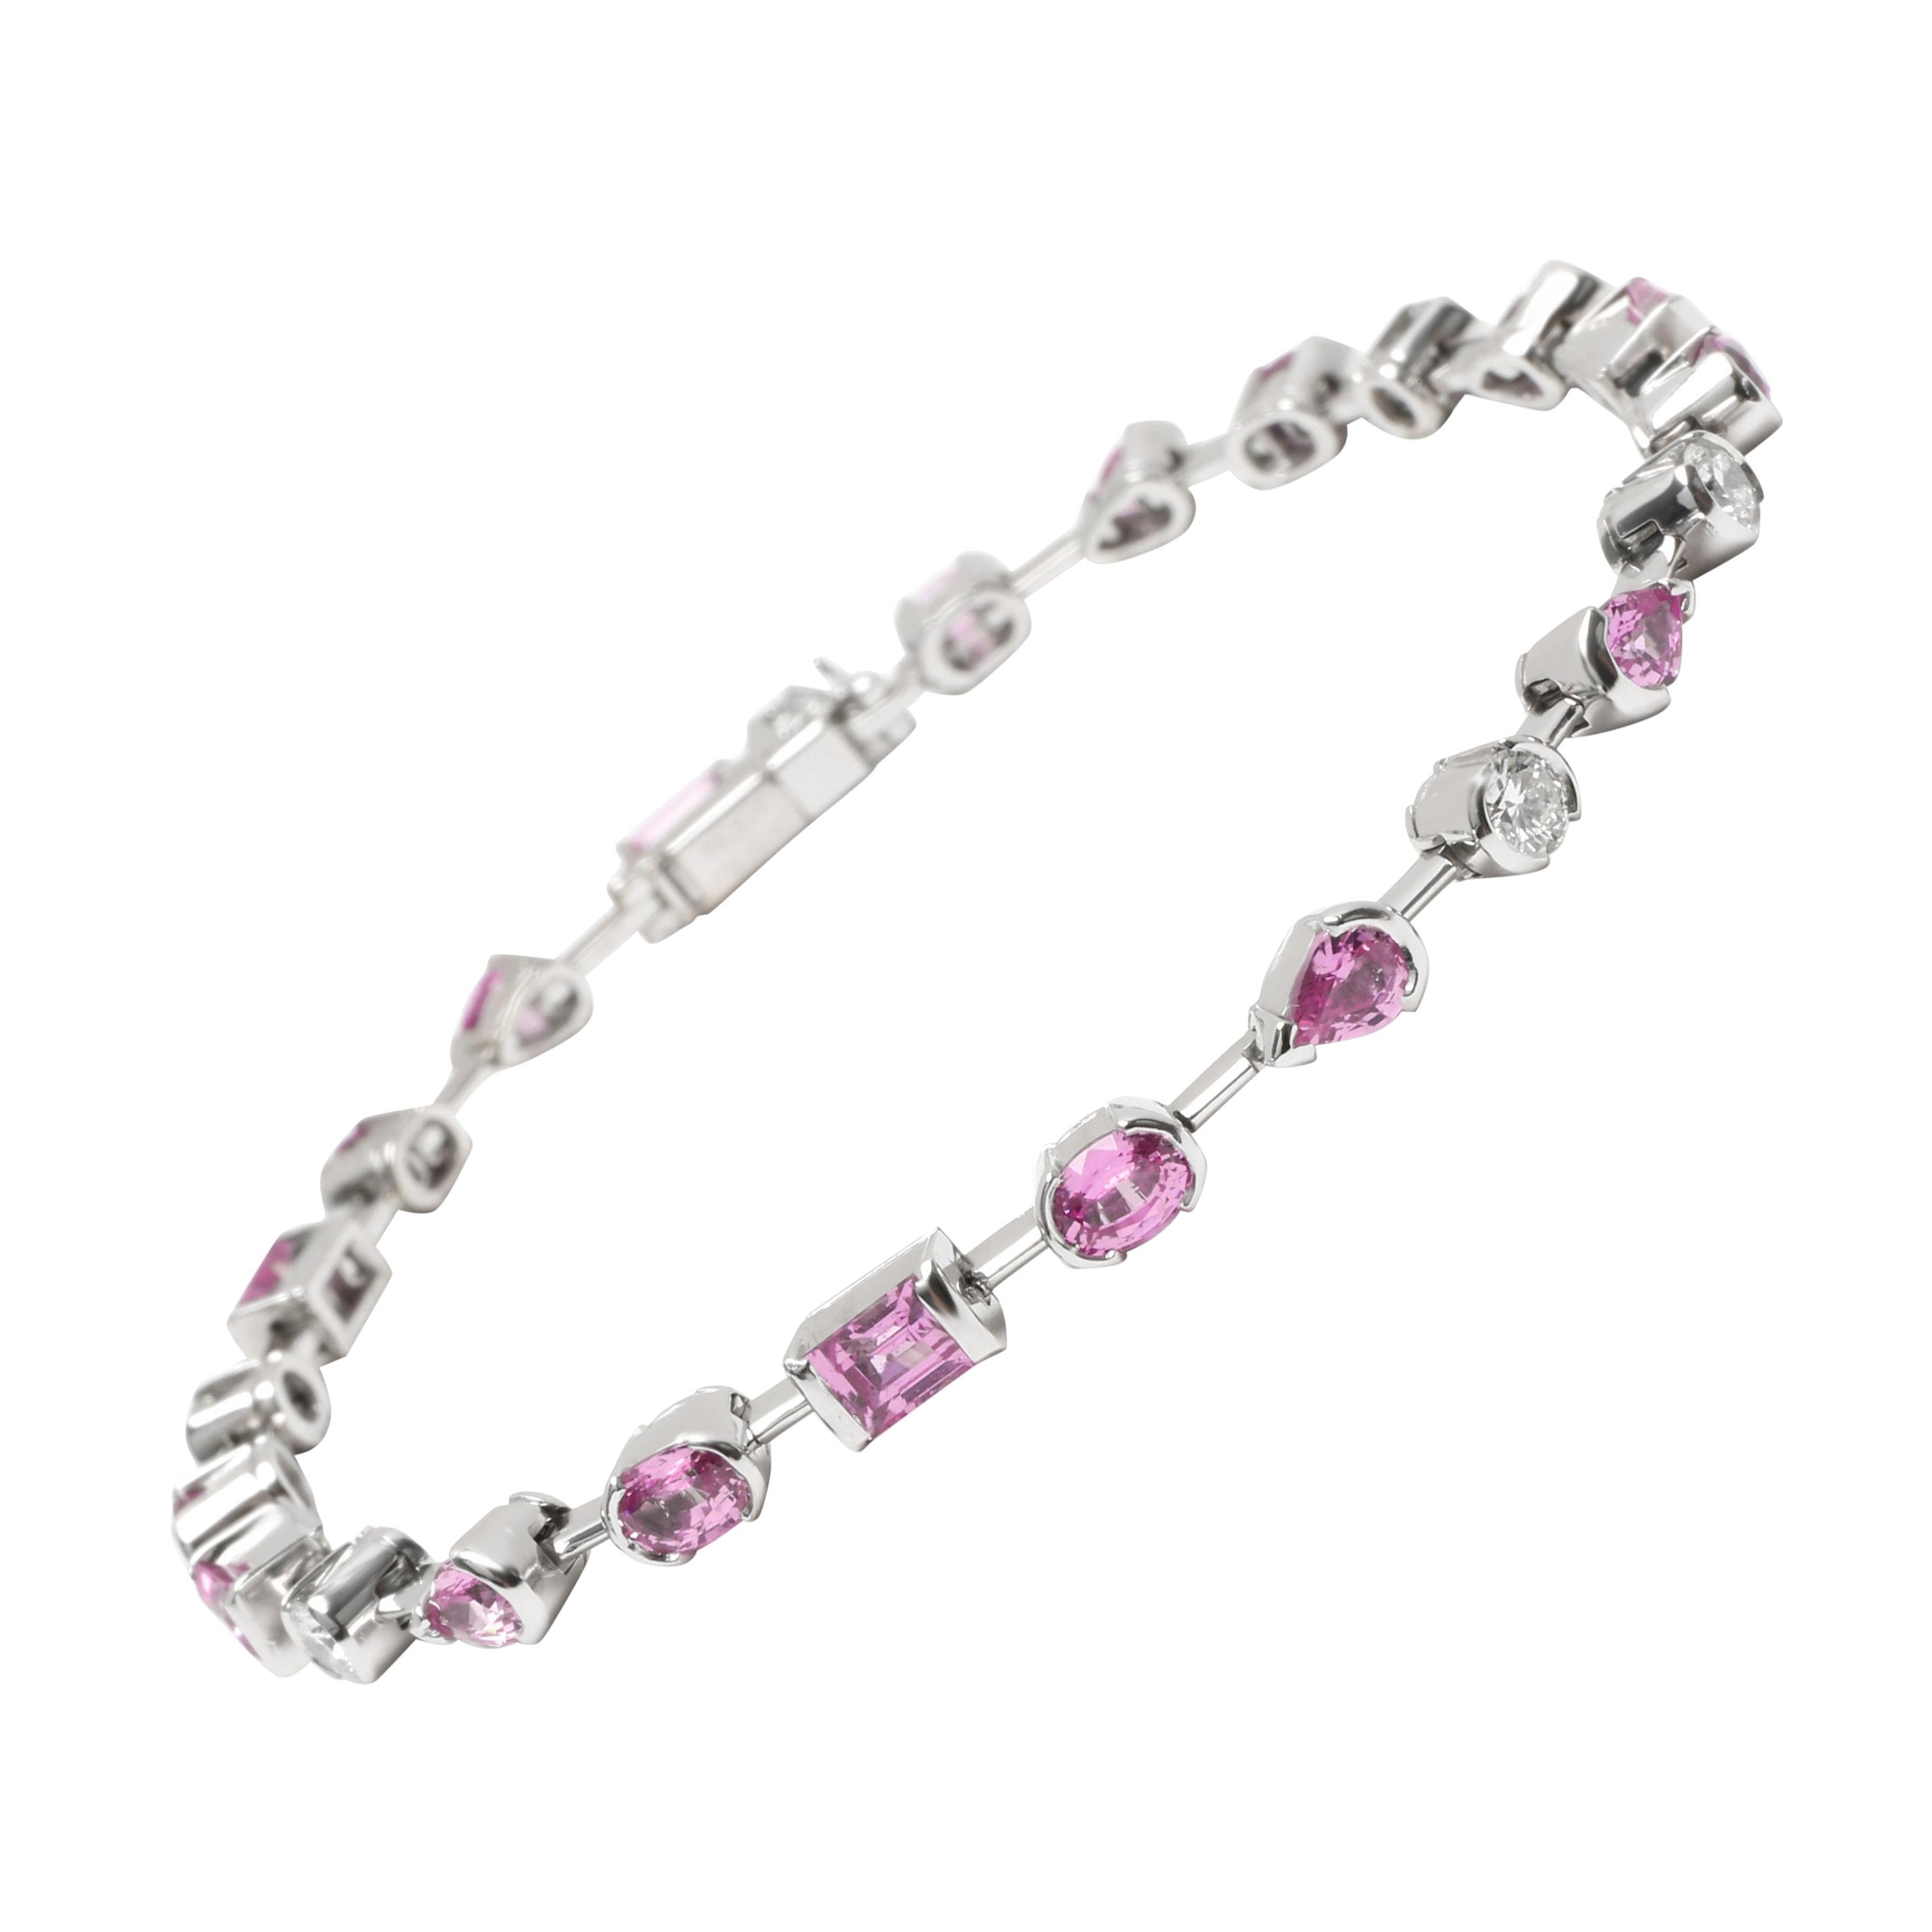 Cartier Meli Melo Pink Sapphire and Diamond Bracelet in 18K White Gold 0.6 CTW